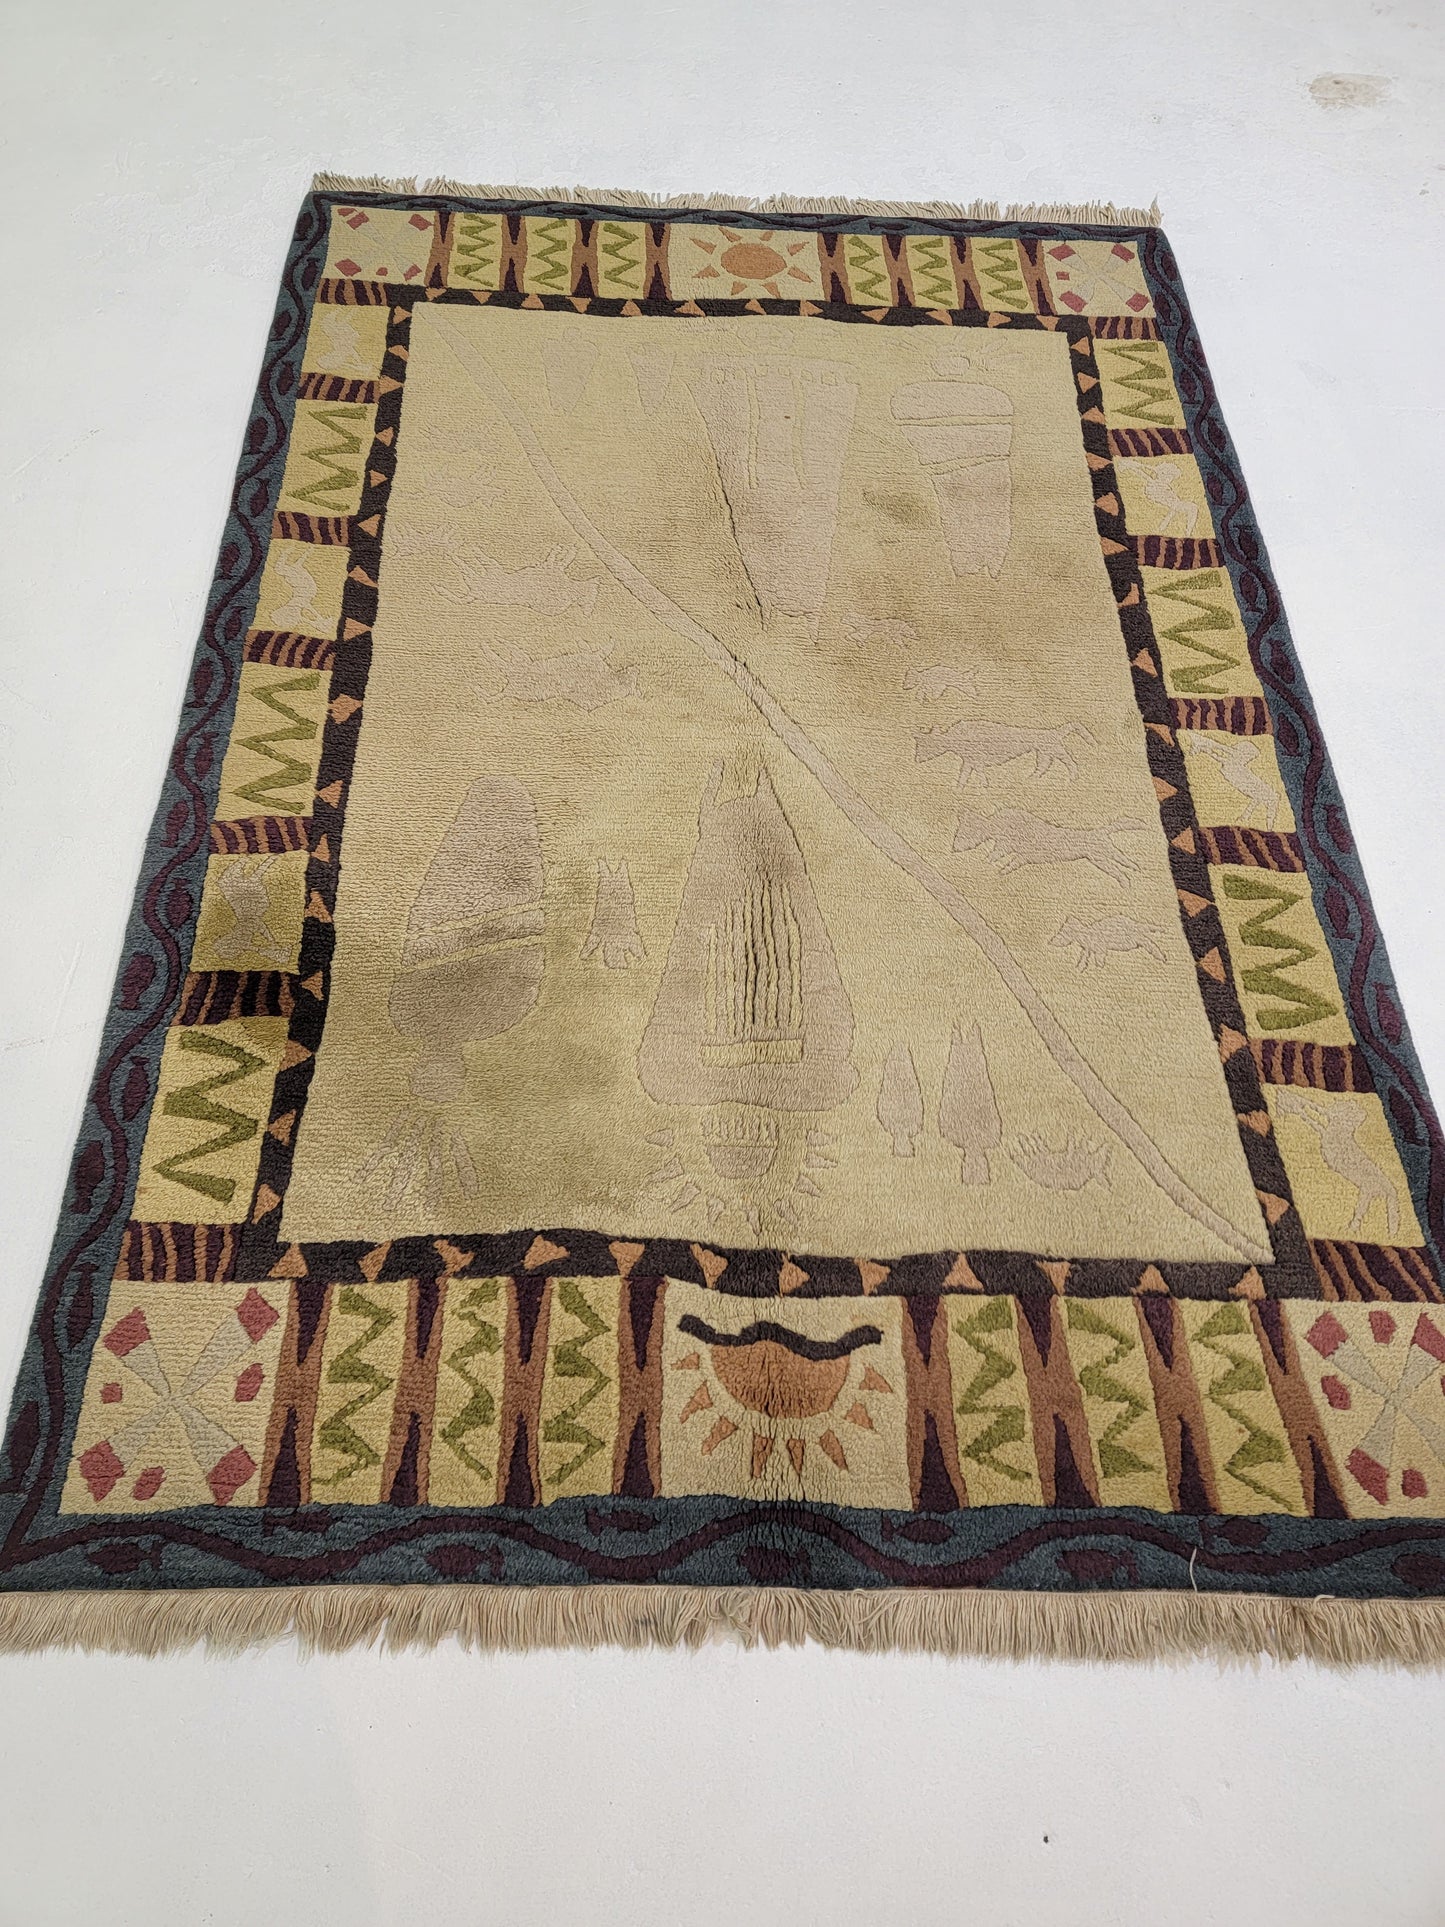 Hand-Knotted Wool Tebetan 4' x 5'10"